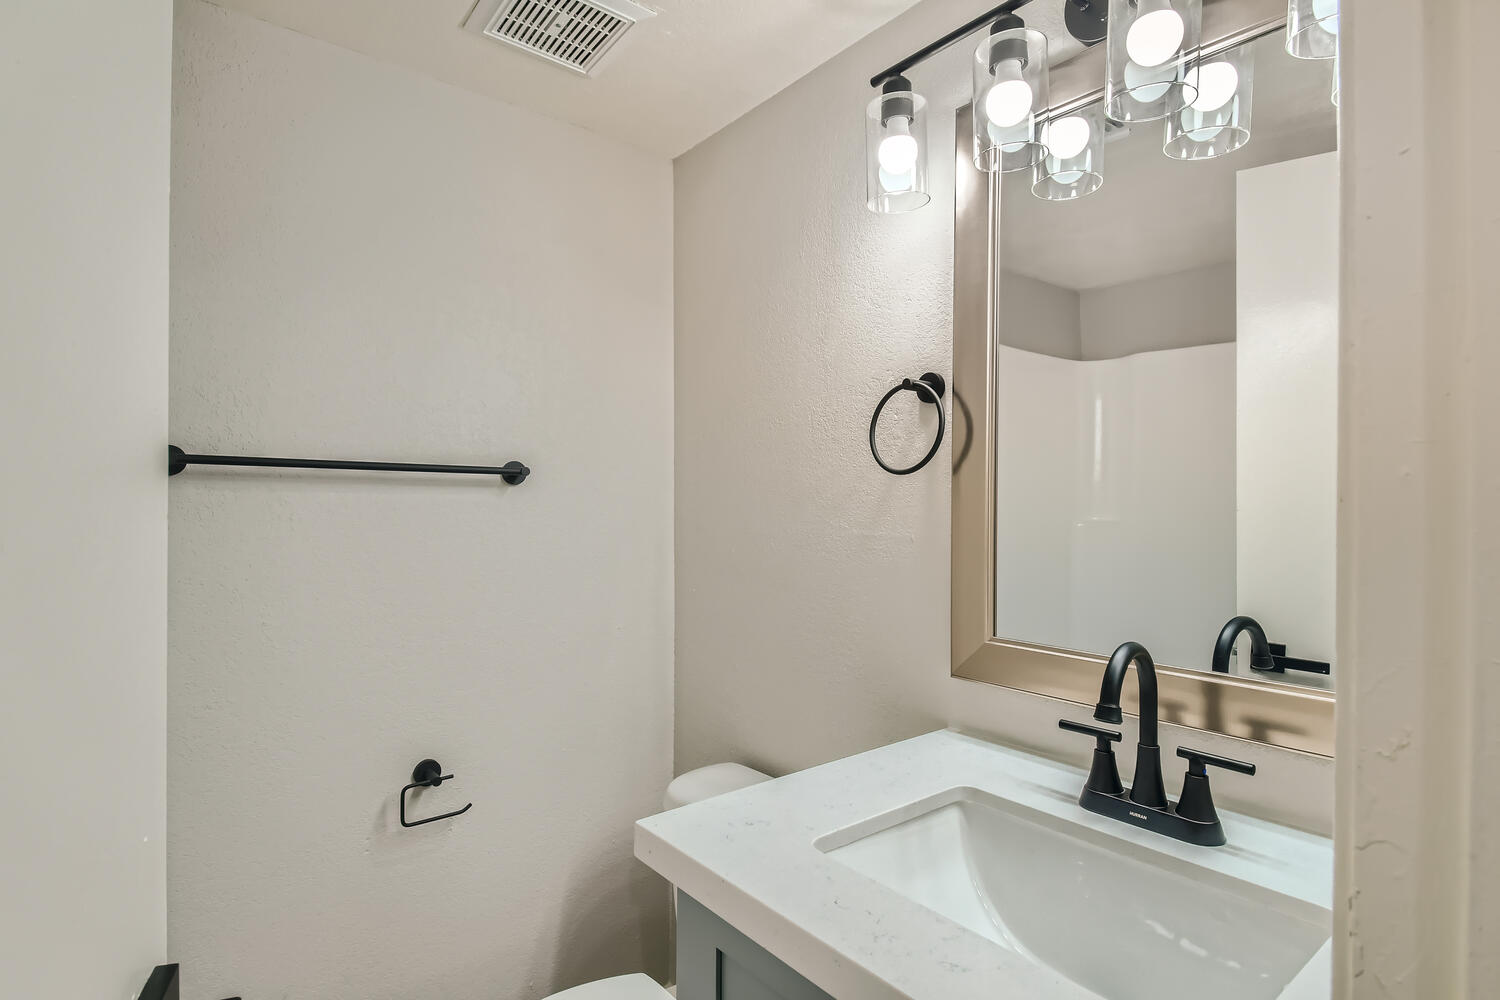 An apartment bathroom with a small vanity, a mirror and a toilet at Rise on McClintock.